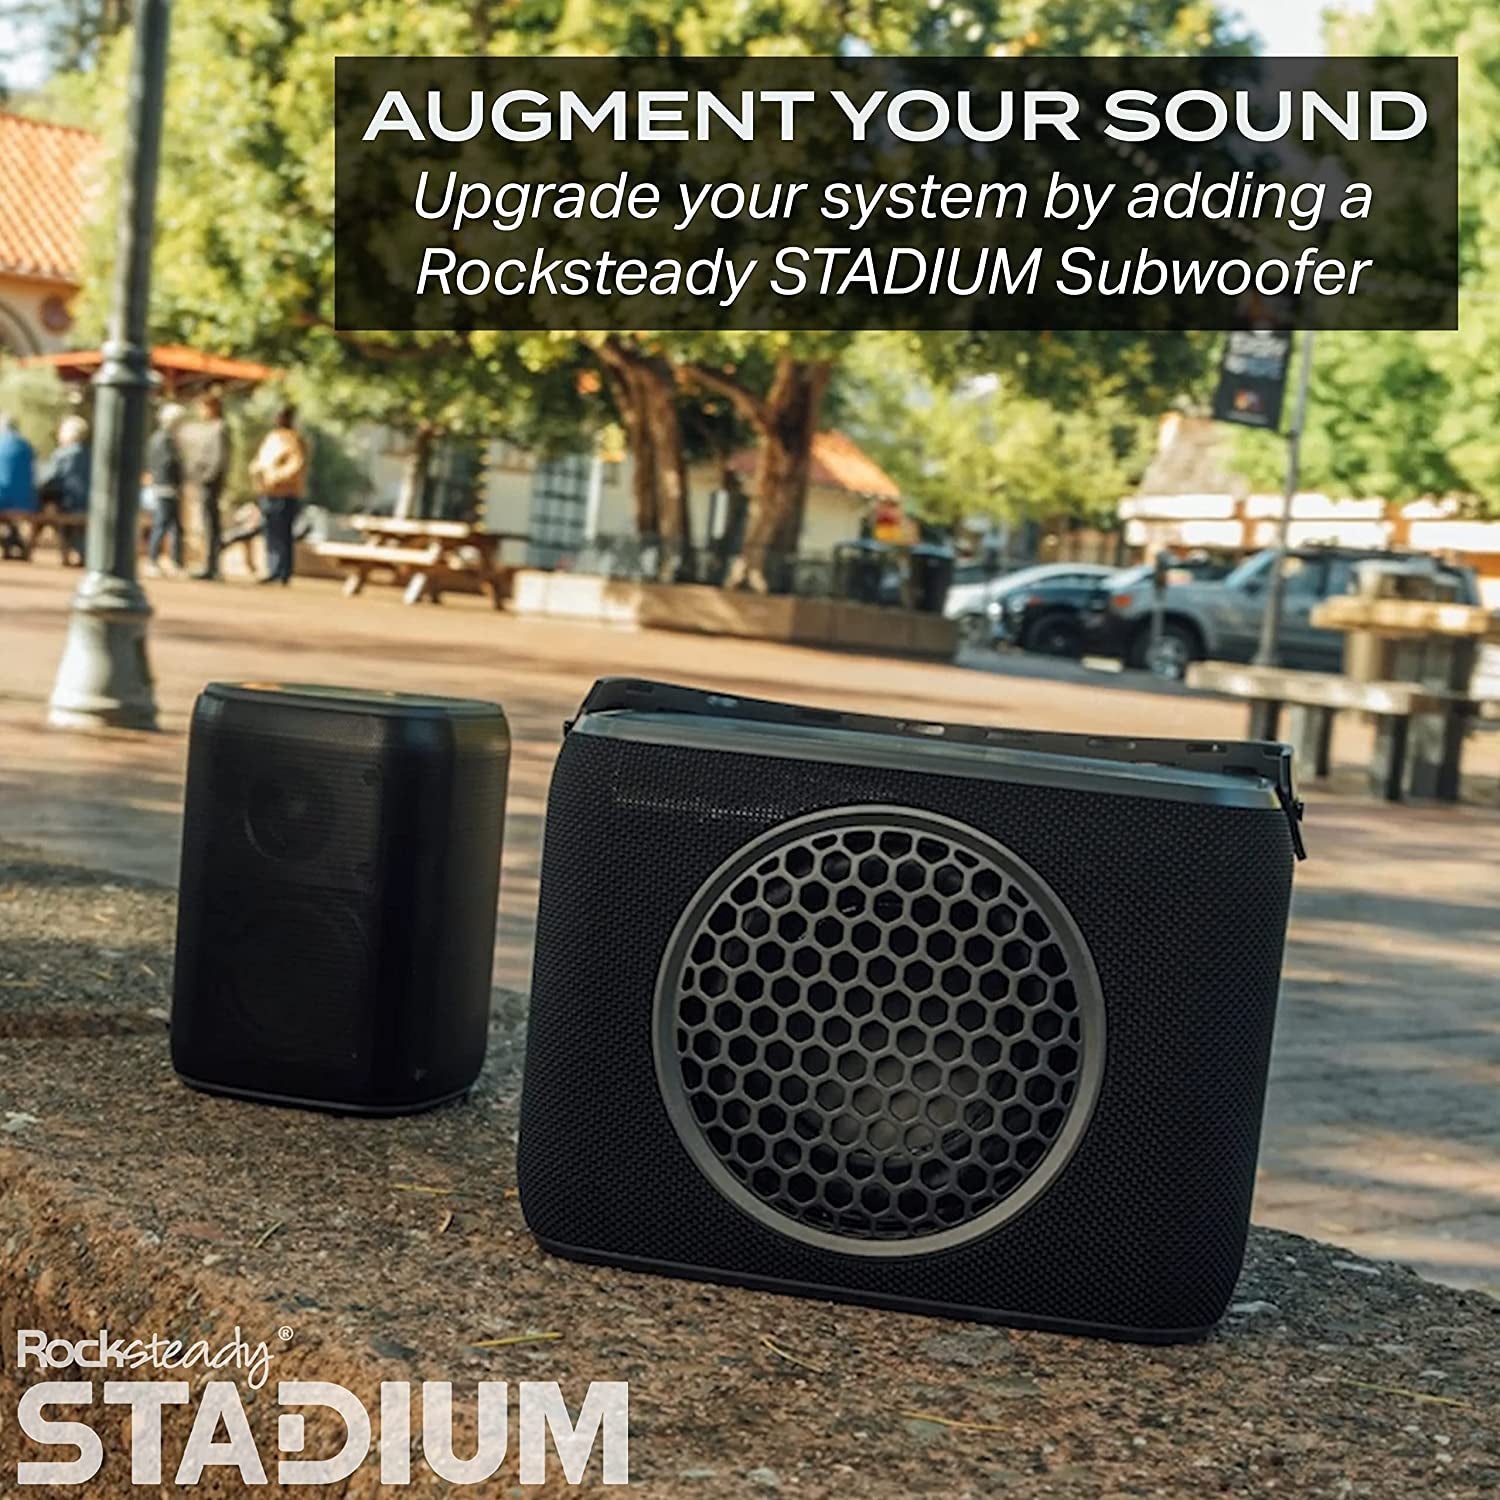 Rocksteady Stadium Portable Bluetooth Speaker Wirelessly Connectible (1 Speaker) - for Indoors & Outdoors - up 30 Hour Battery Life